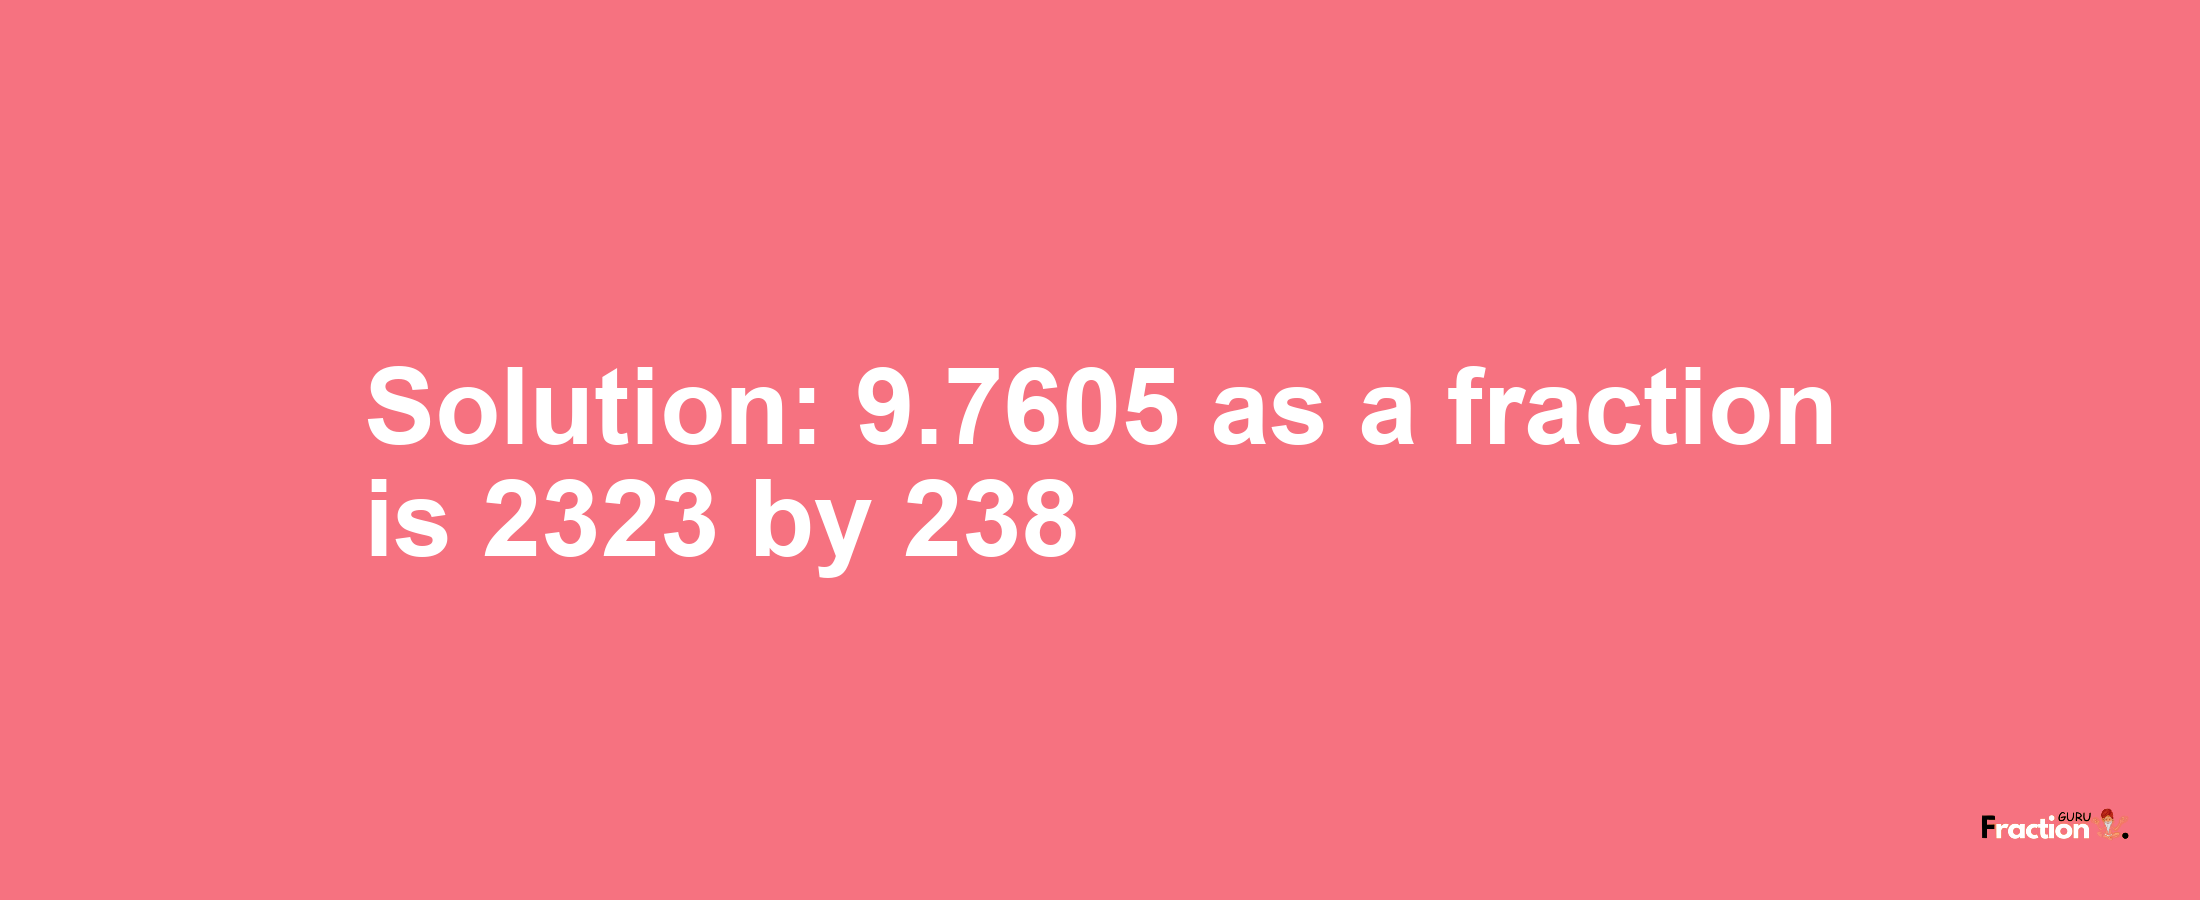 Solution:9.7605 as a fraction is 2323/238